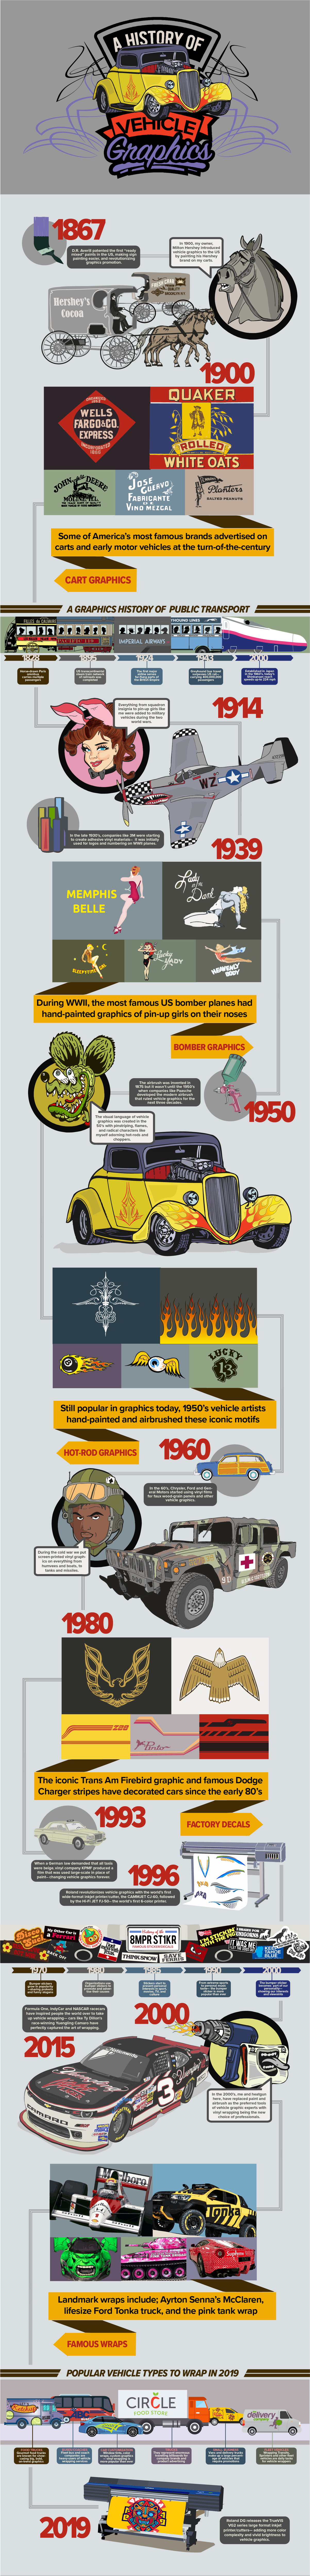 history of vehicle graphics infographic